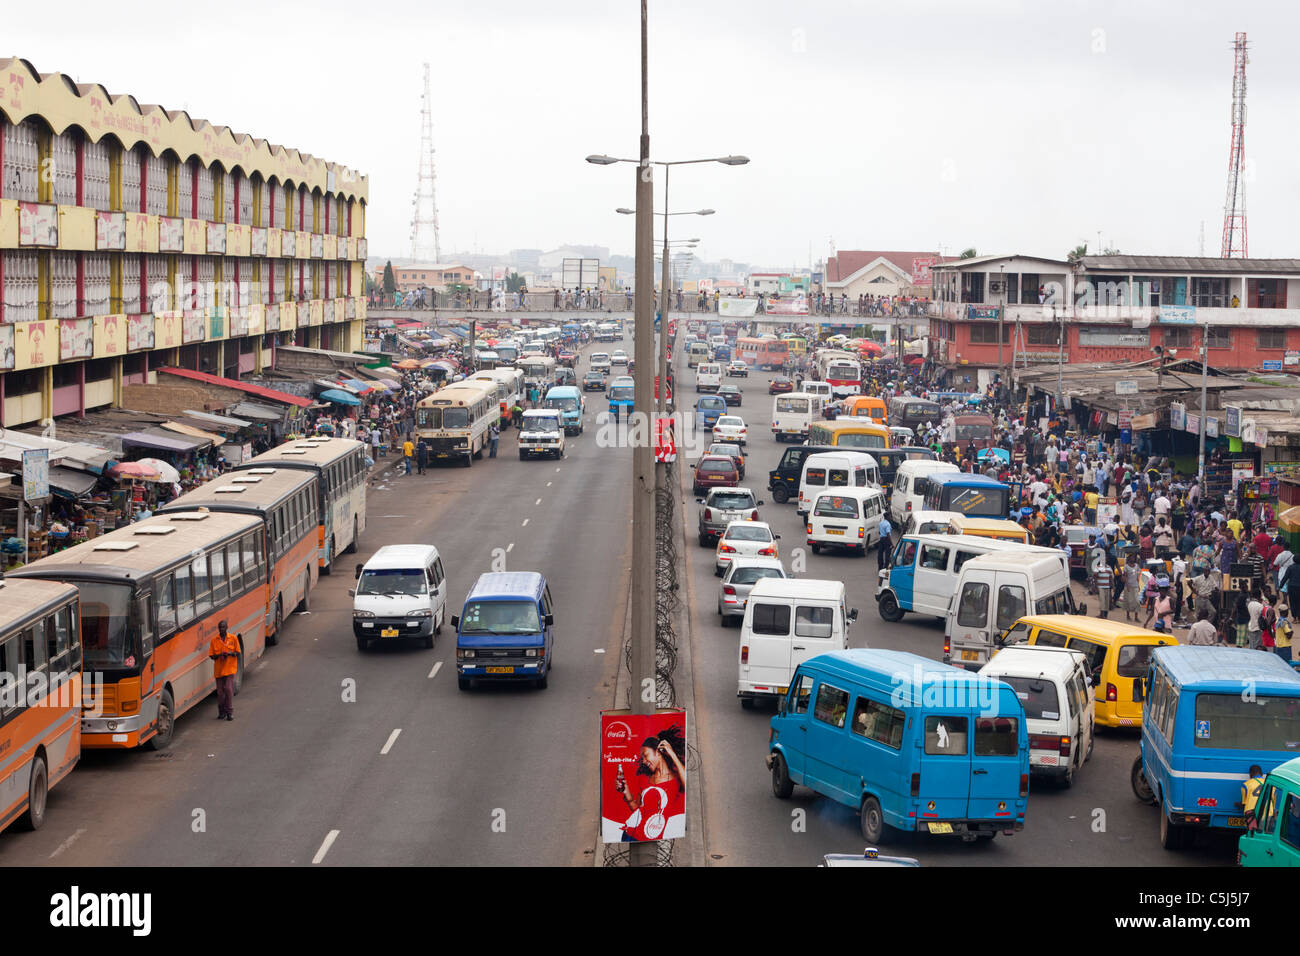 Traffic in busy market street with stalls, Kaneshie Market, Accra, Ghana Stock Photo